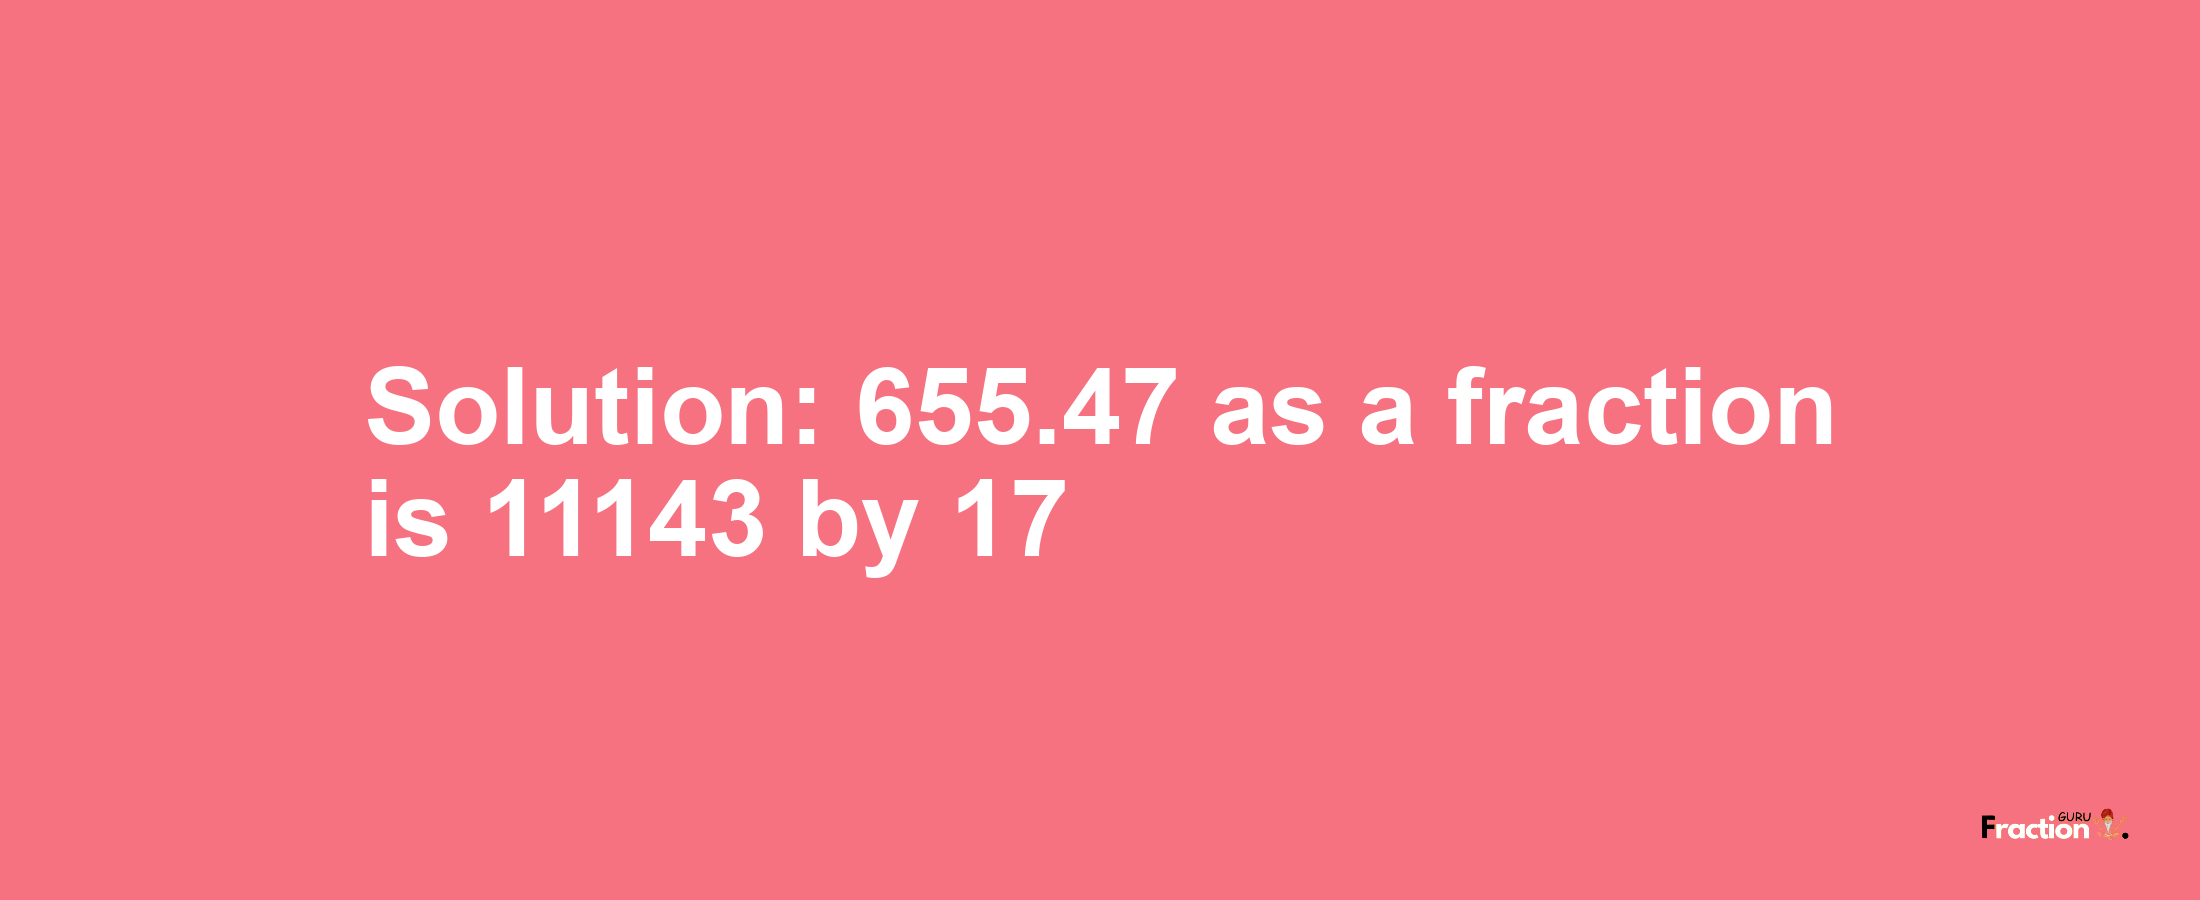 Solution:655.47 as a fraction is 11143/17